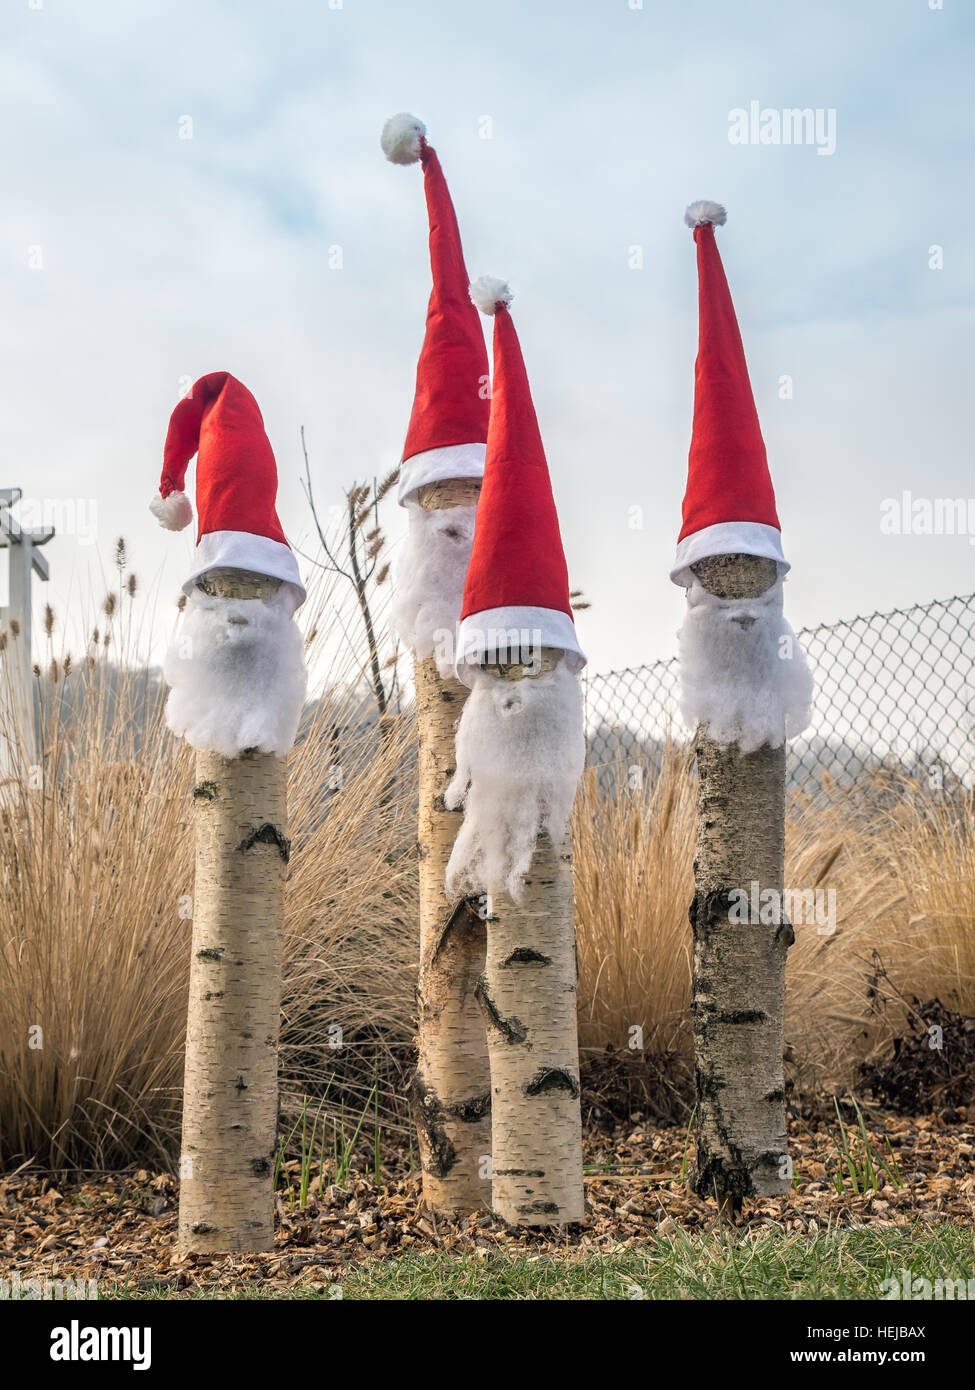 Four santa-claus style garden gnomes with red hats and white beards Stock Photo